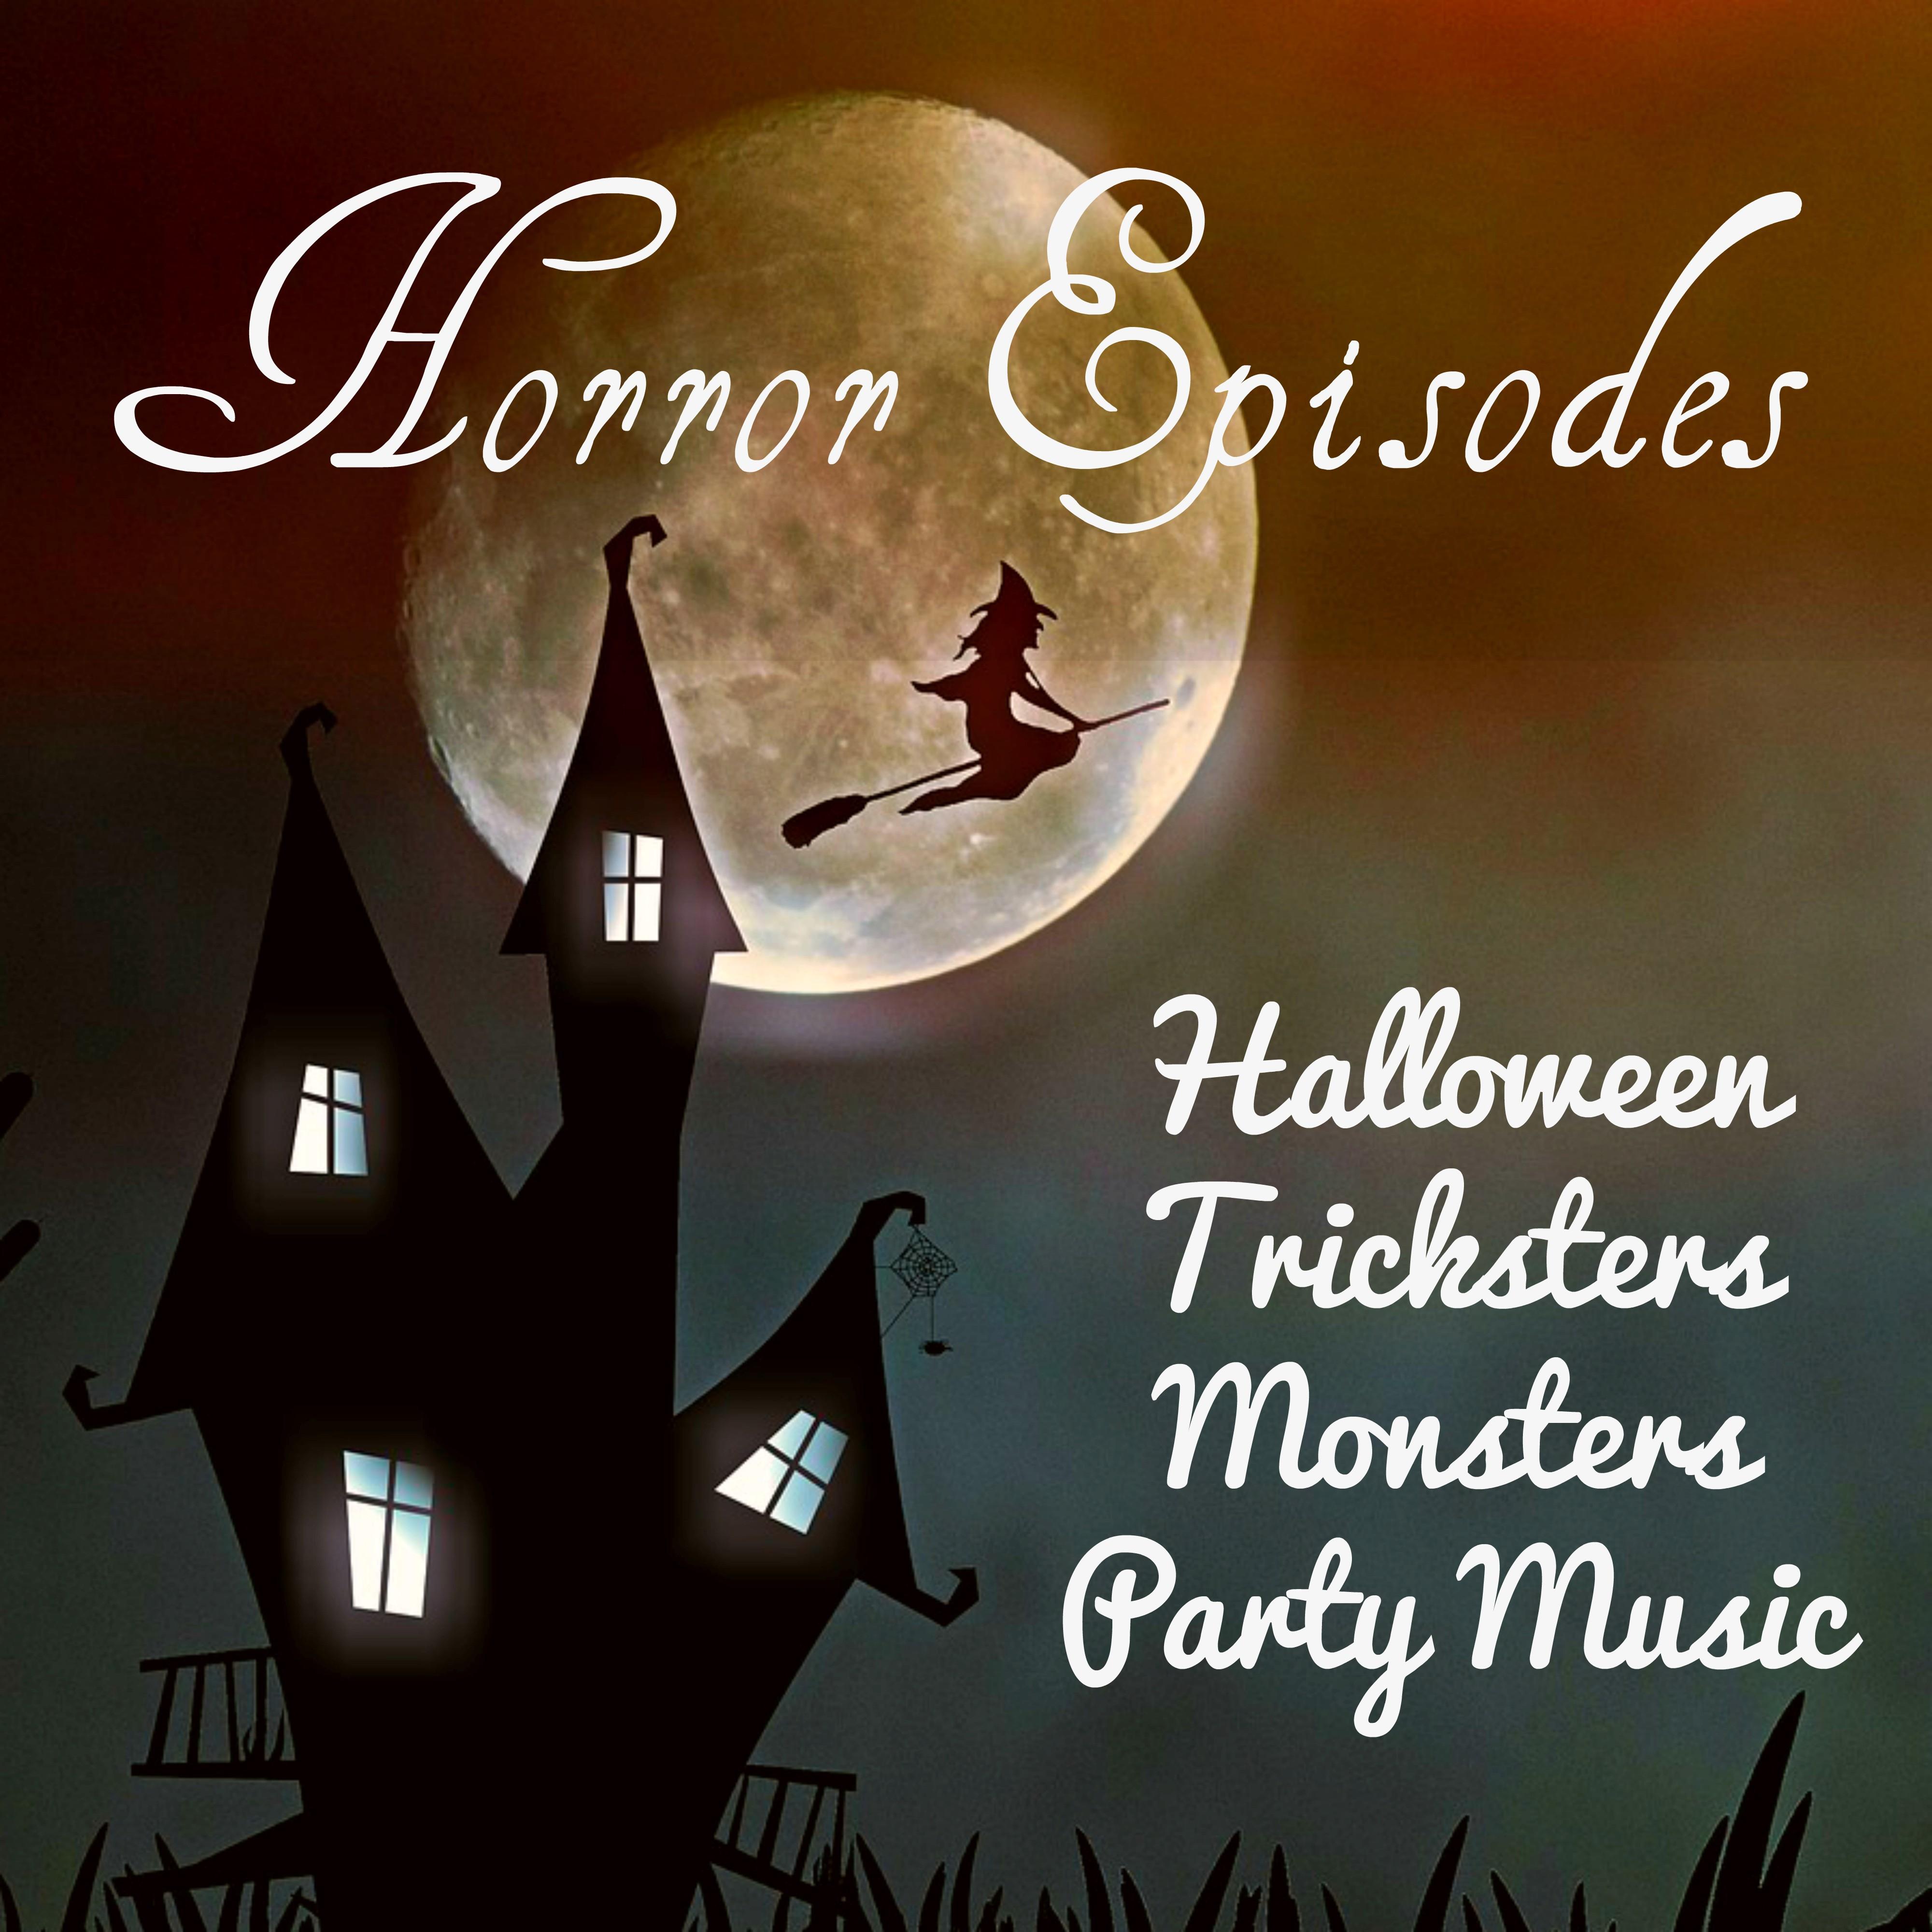 Horror Episodes - Halloween Tricksters Monsters Party Music with Piano Electro Acoustic Nature Spiritual Sounds